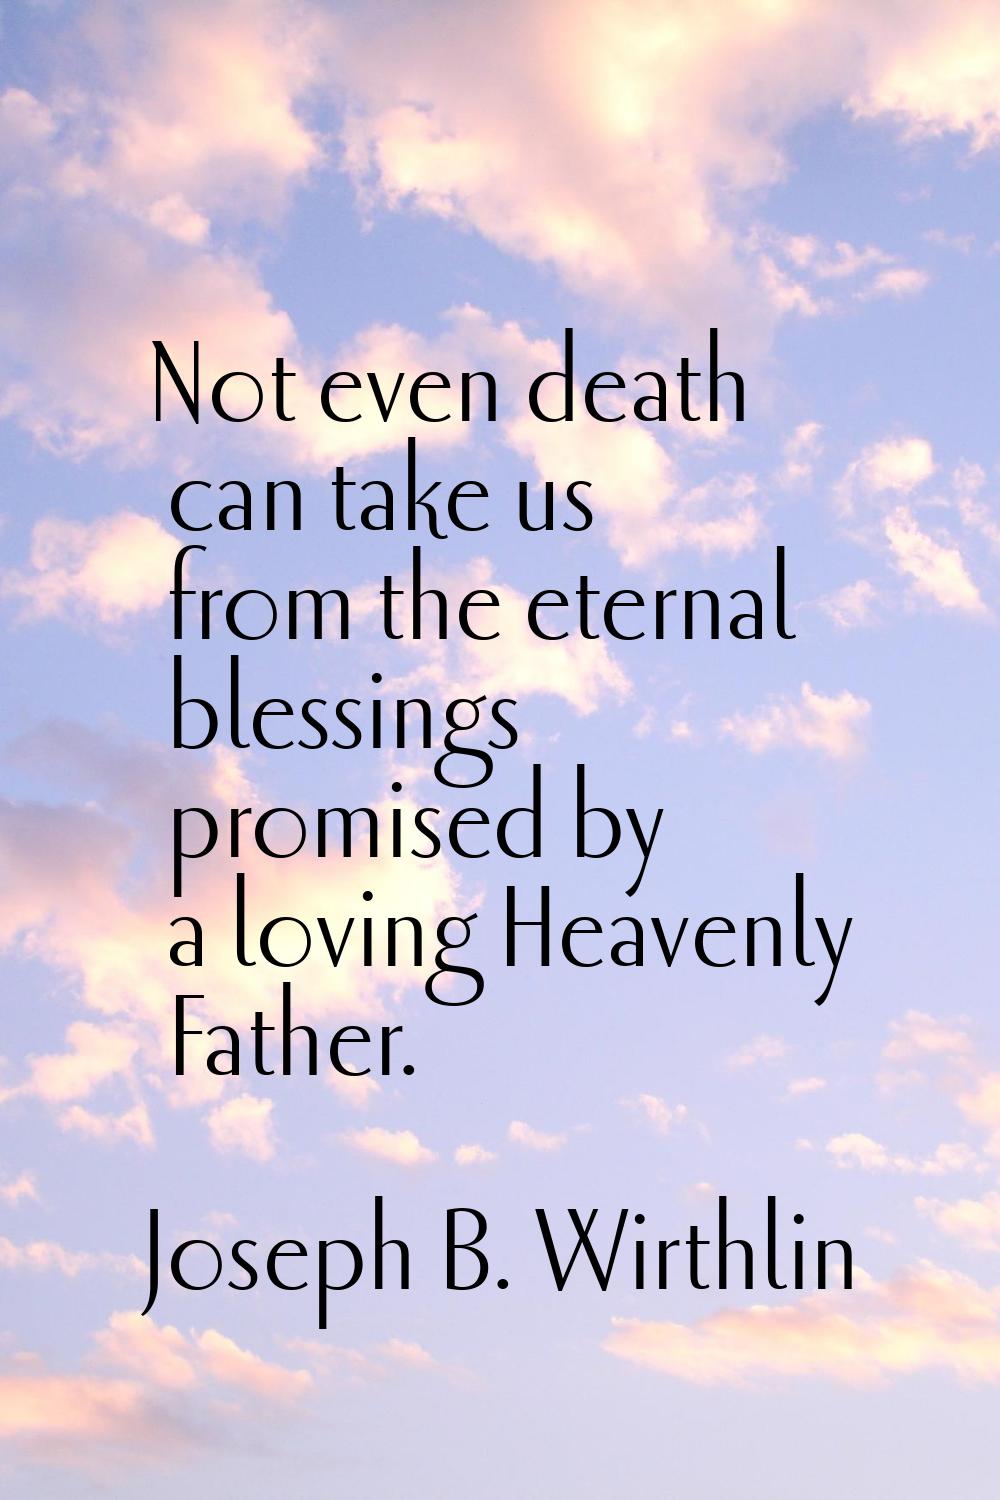 Not even death can take us from the eternal blessings promised by a loving Heavenly Father.